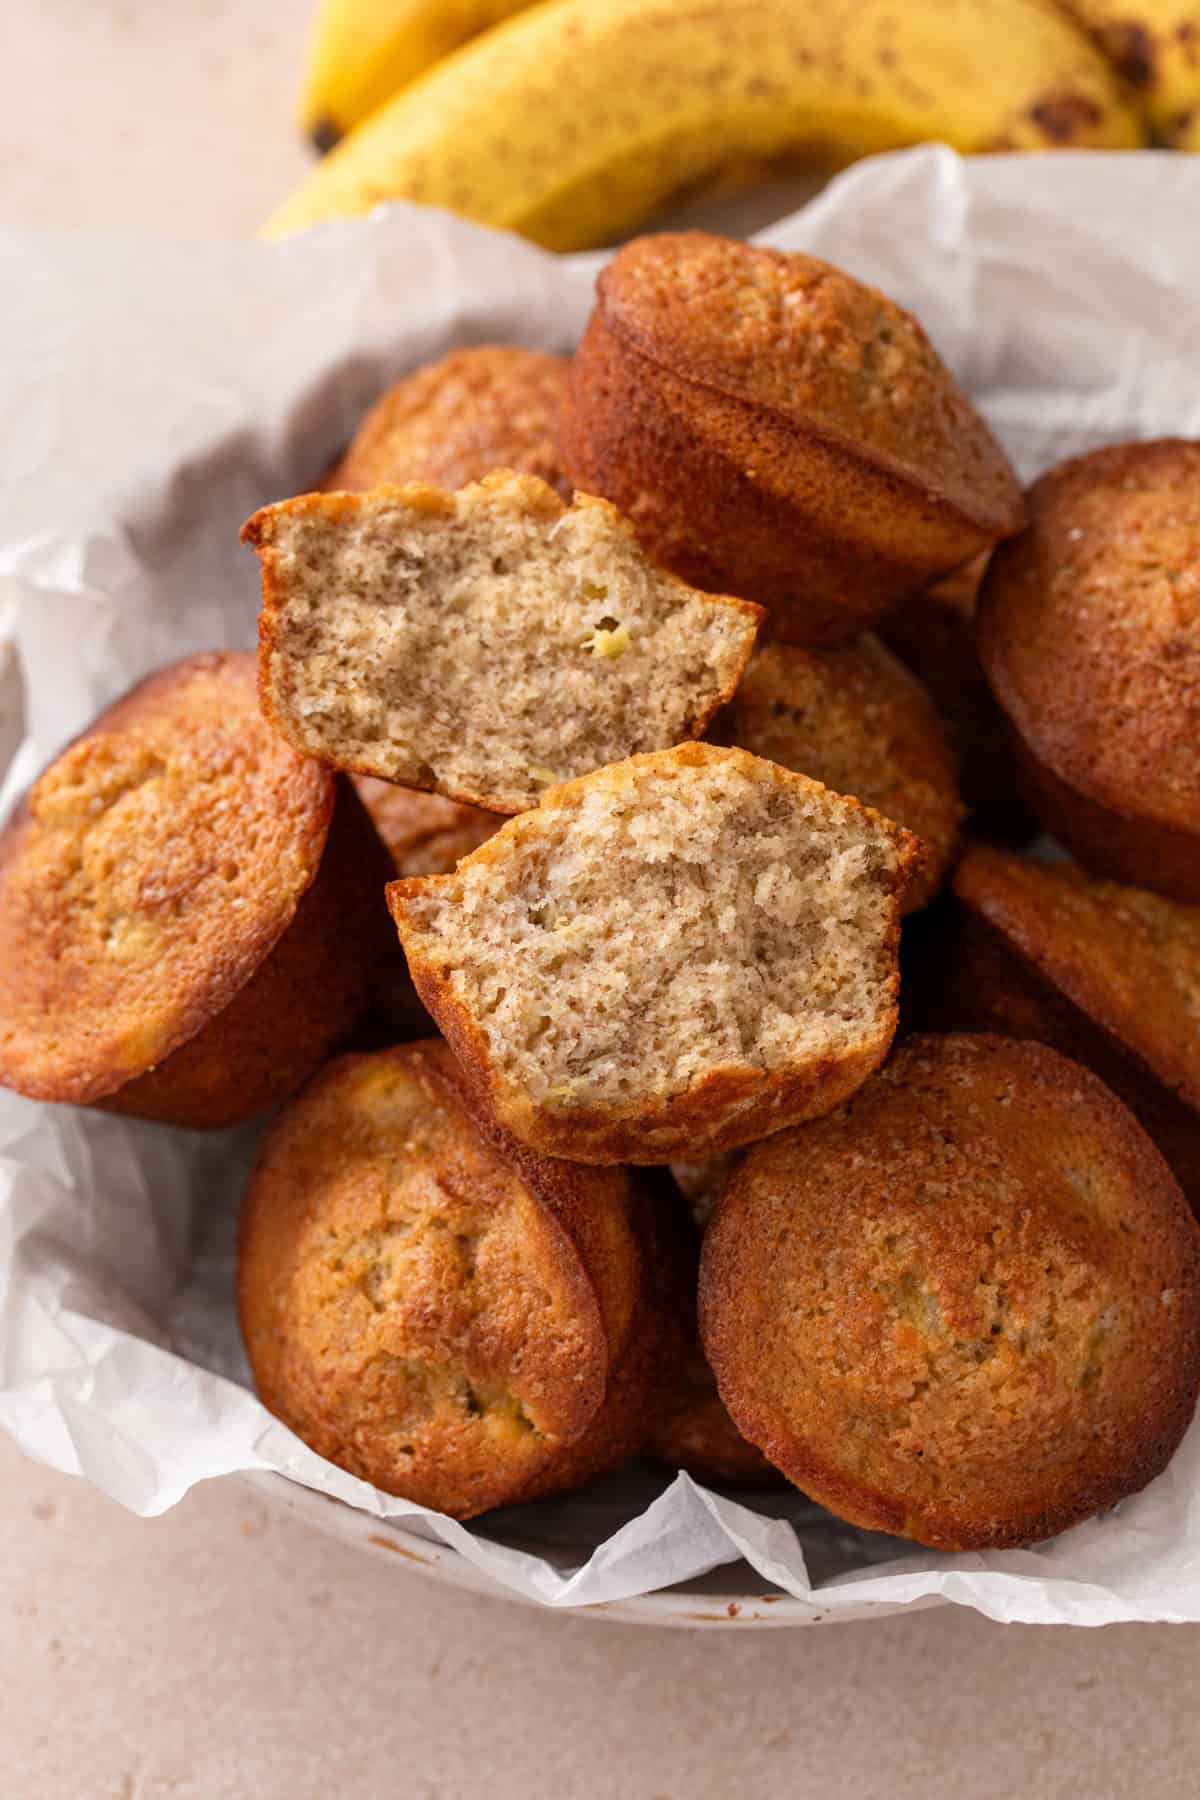 Basket of banana bread muffins with a halved muffin arranged on top.